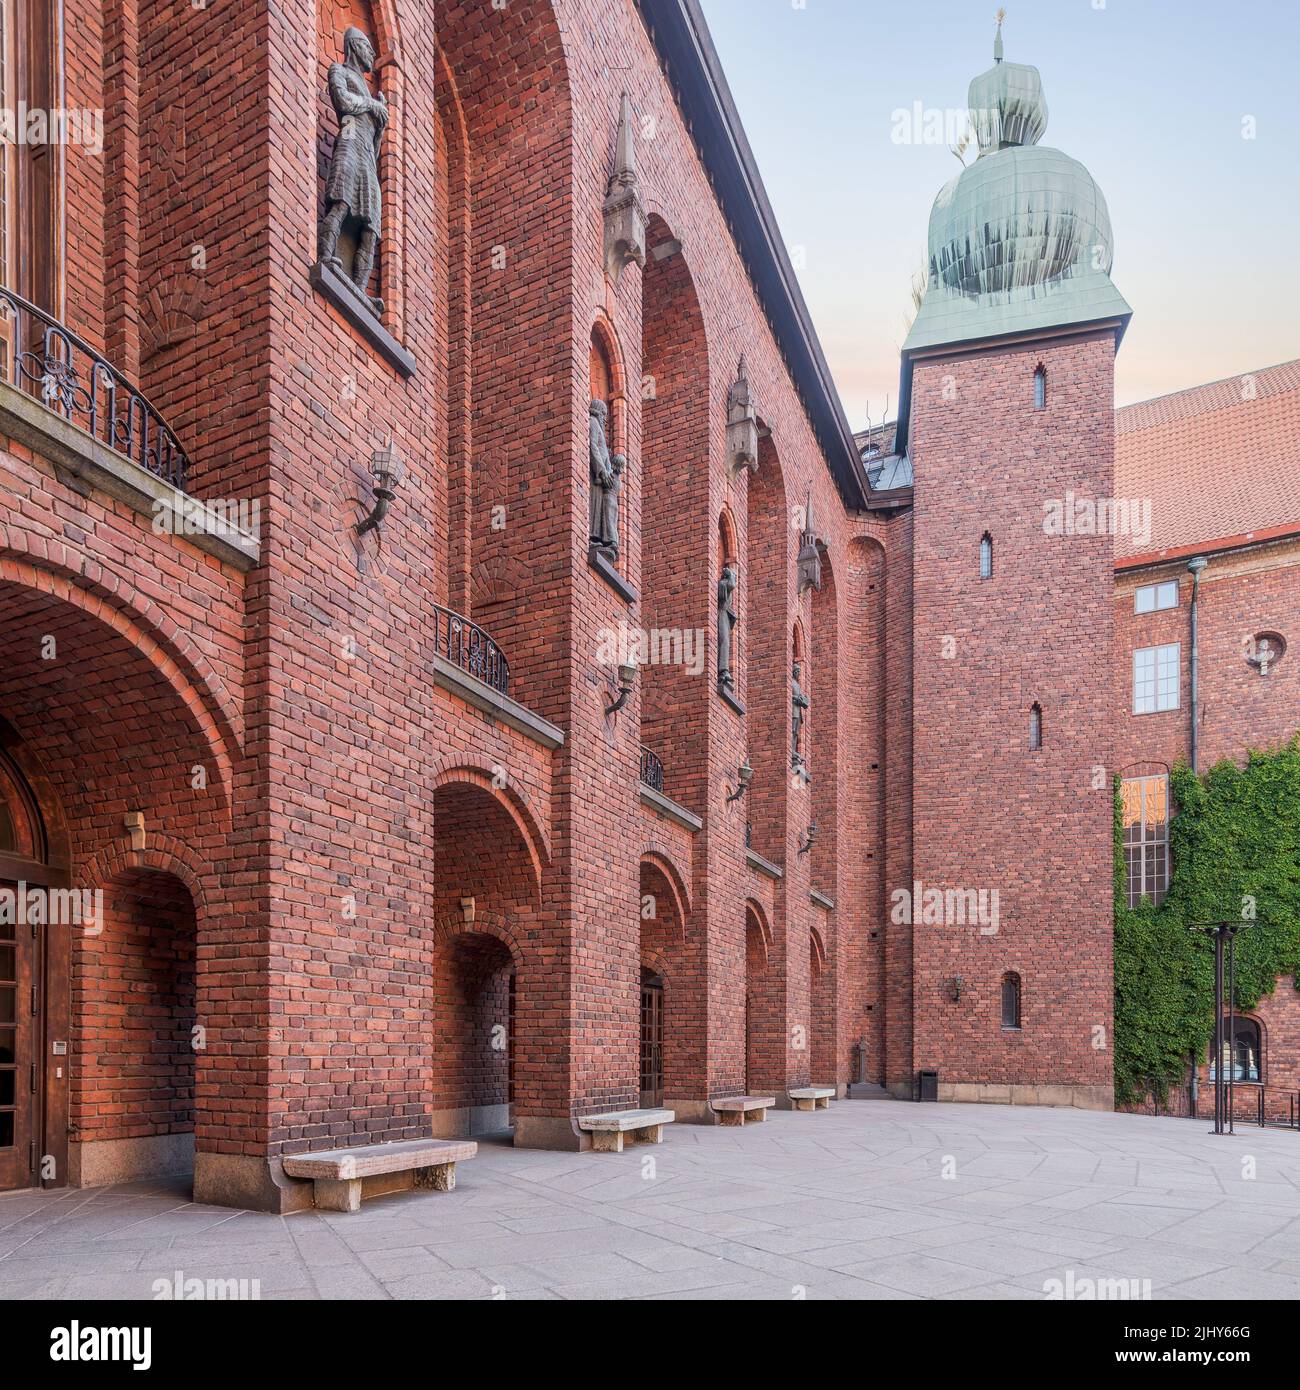 Stockholm City Hall, Swedish: Stadshuset, stands on the eastern tip of Kungsholmen island, next to Riddarfjarden's northern shore and facing the islands of Riddarholmen and Sodermalm, Sweden Stock Photo